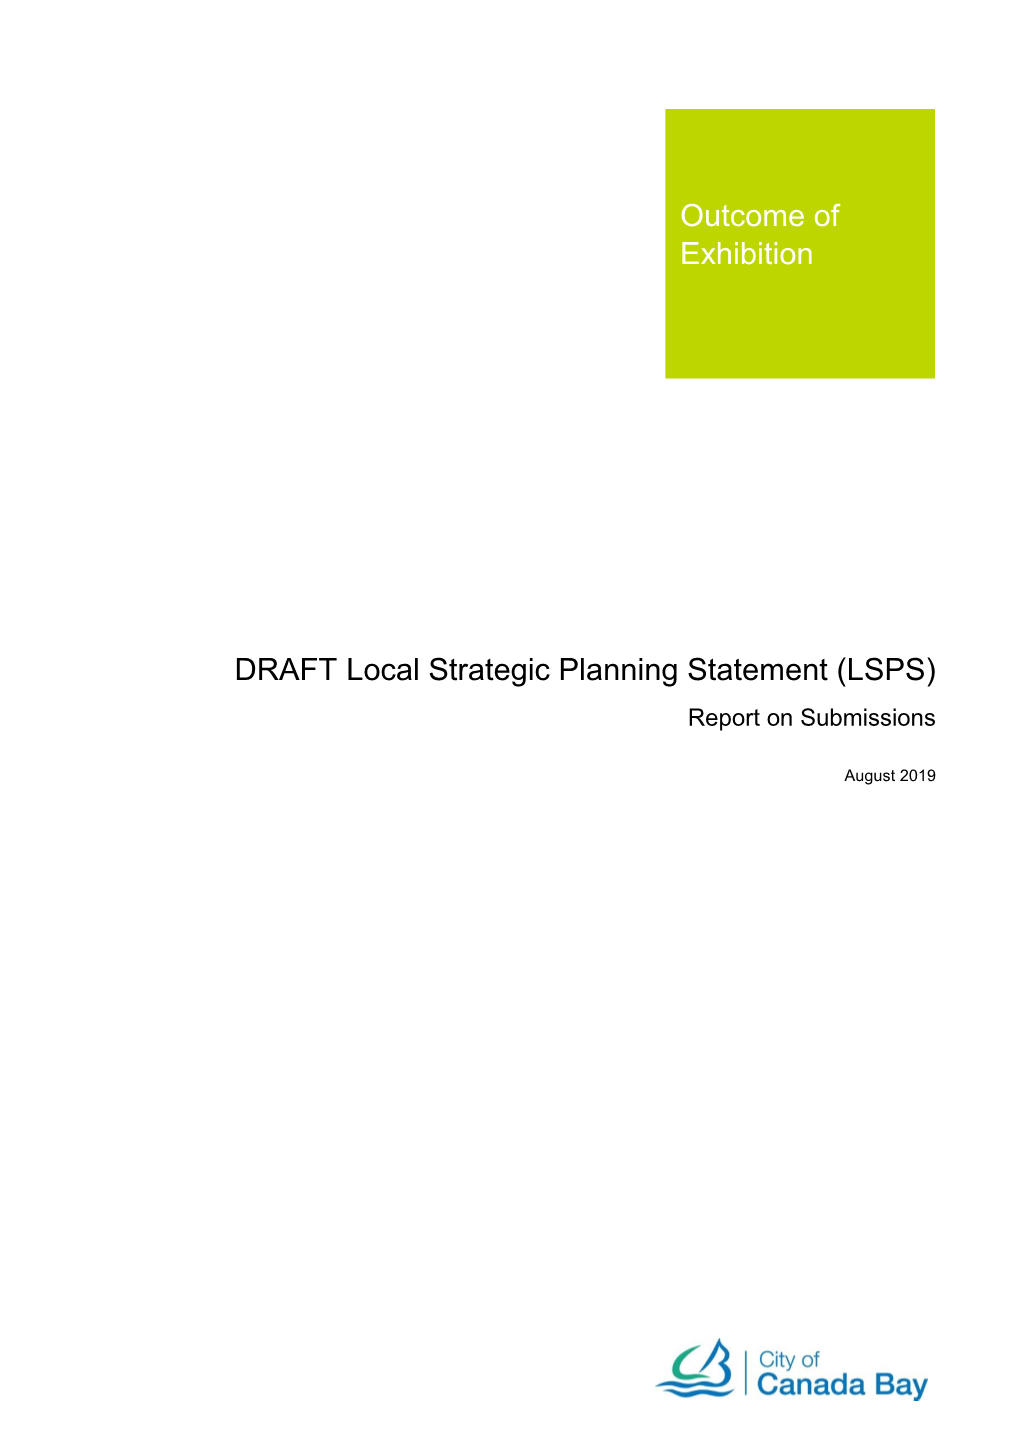 DRAFT Local Strategic Planning Statement (LSPS) Report on Submissions